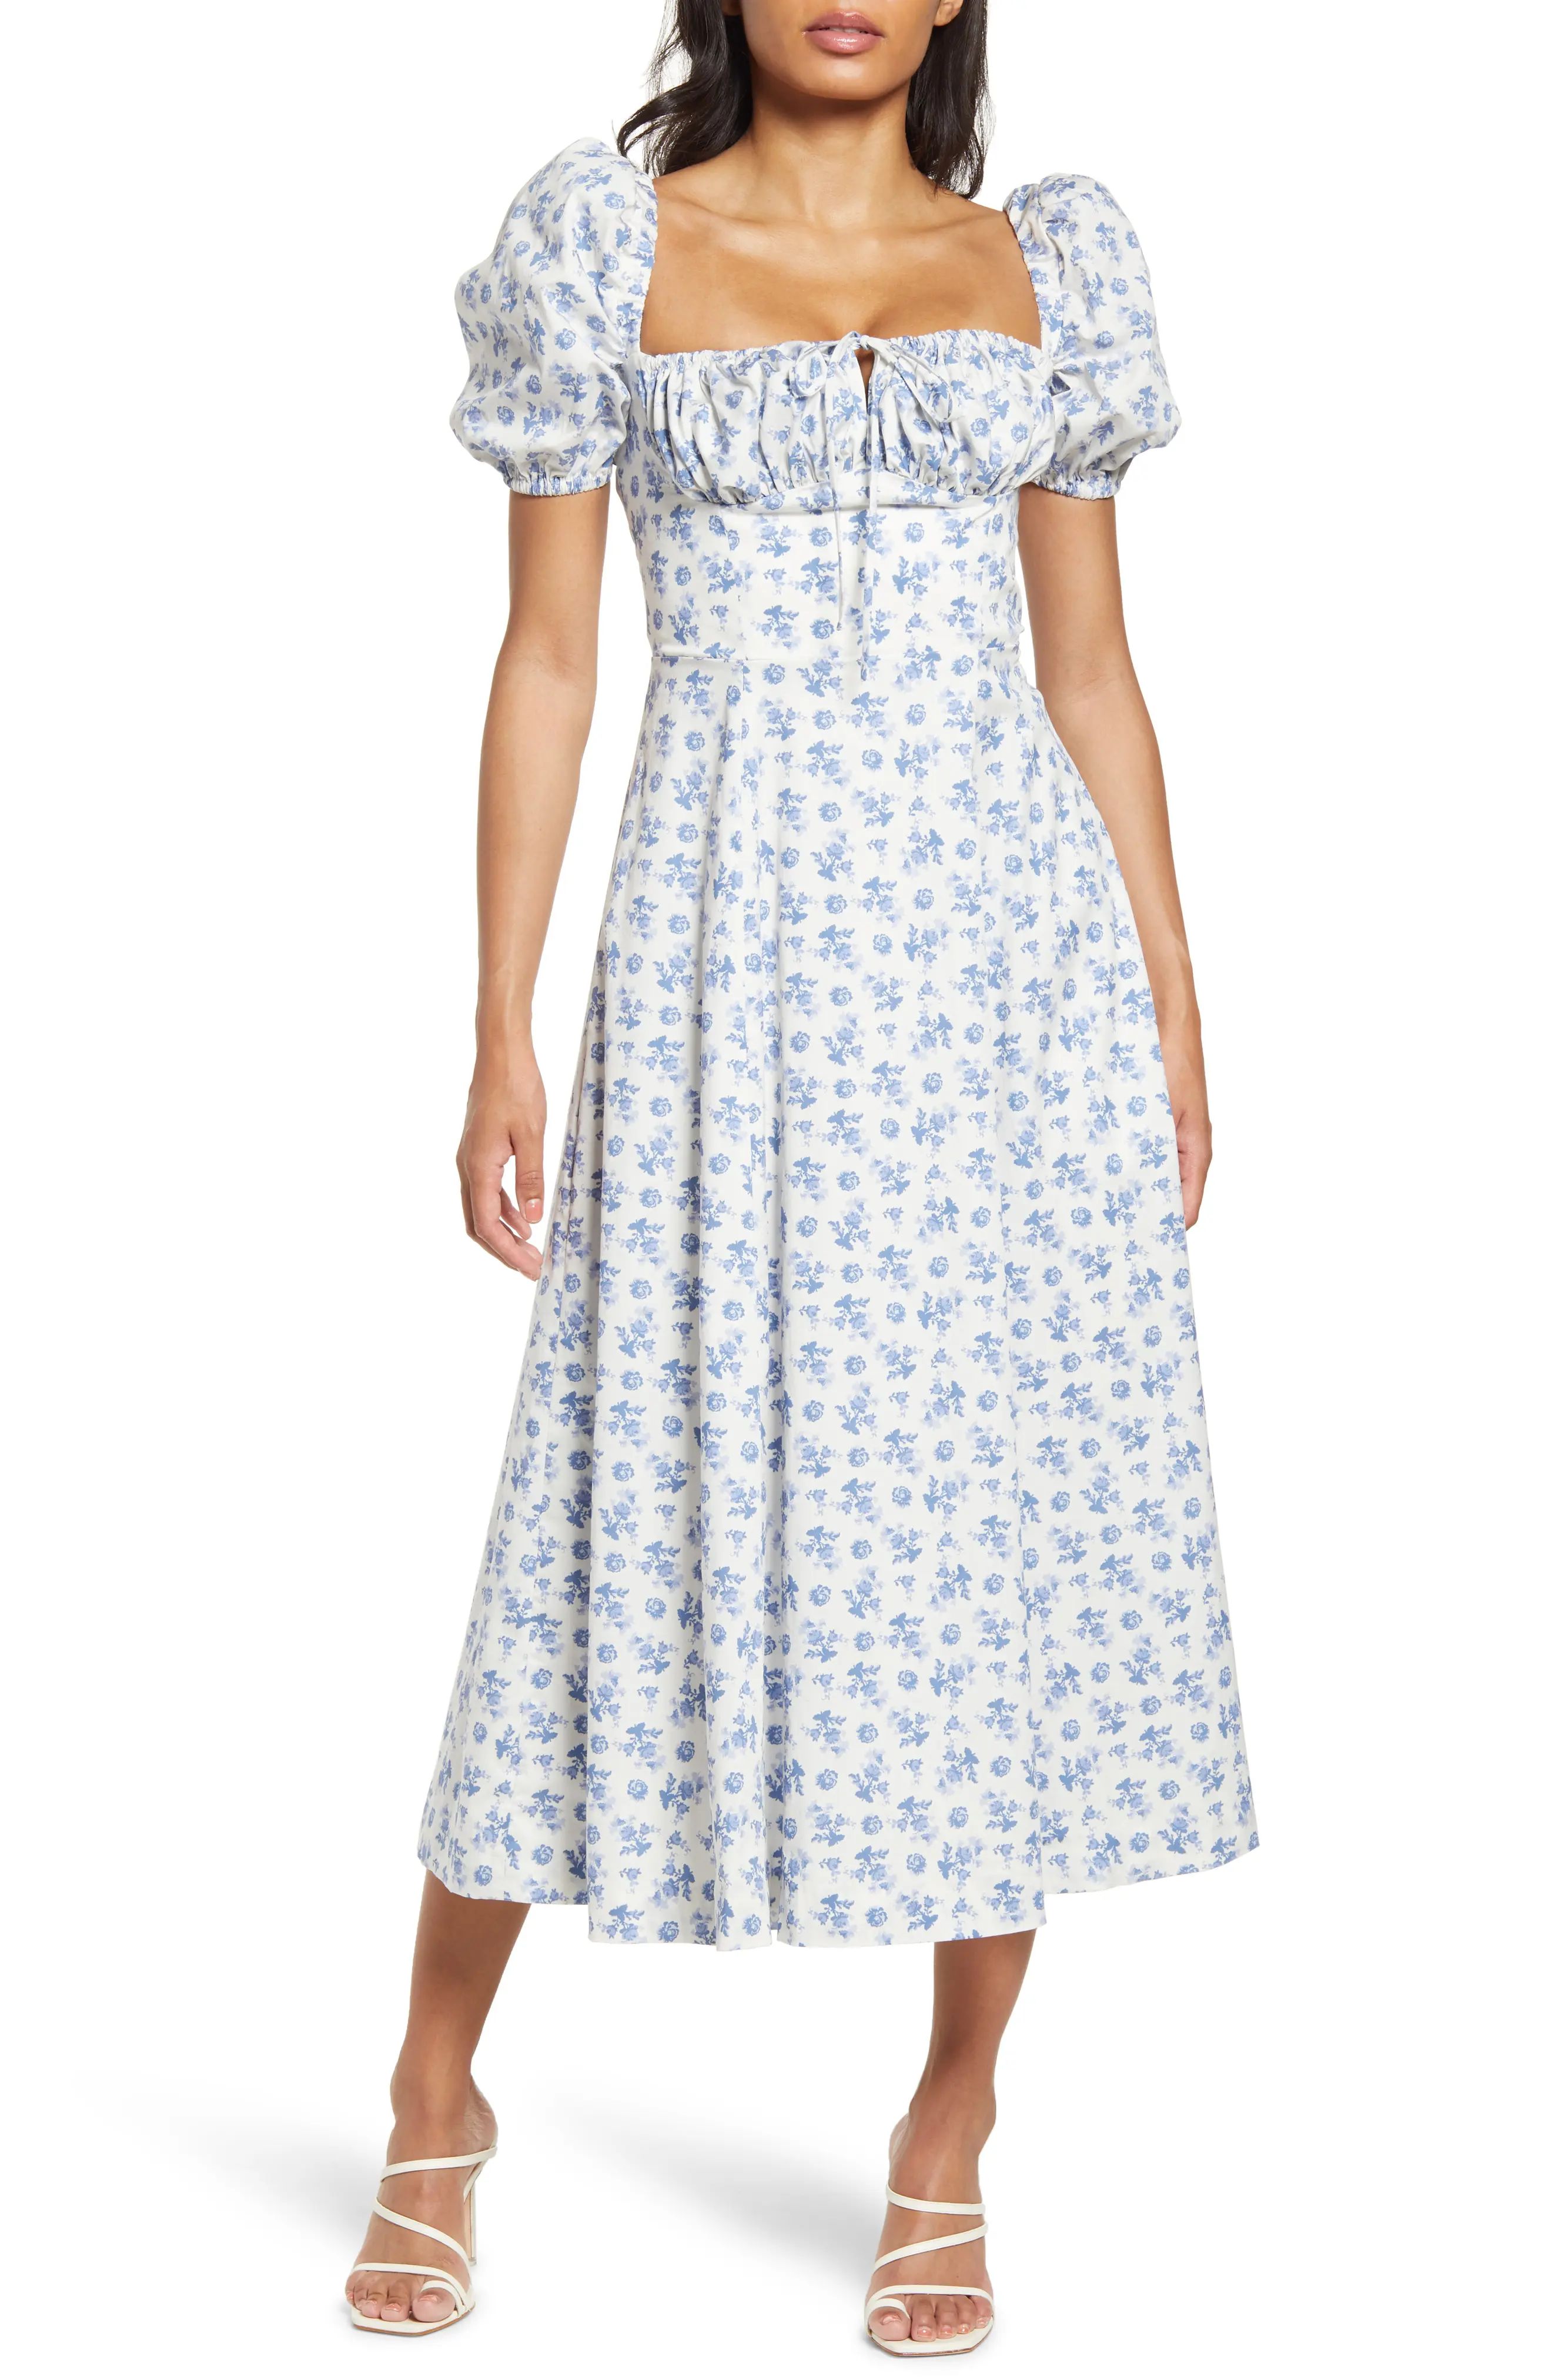 HOUSE OF CB Tallulah Puff Sleeve Midi Dress in Blue Floral at Nordstrom, Size Medium | Nordstrom